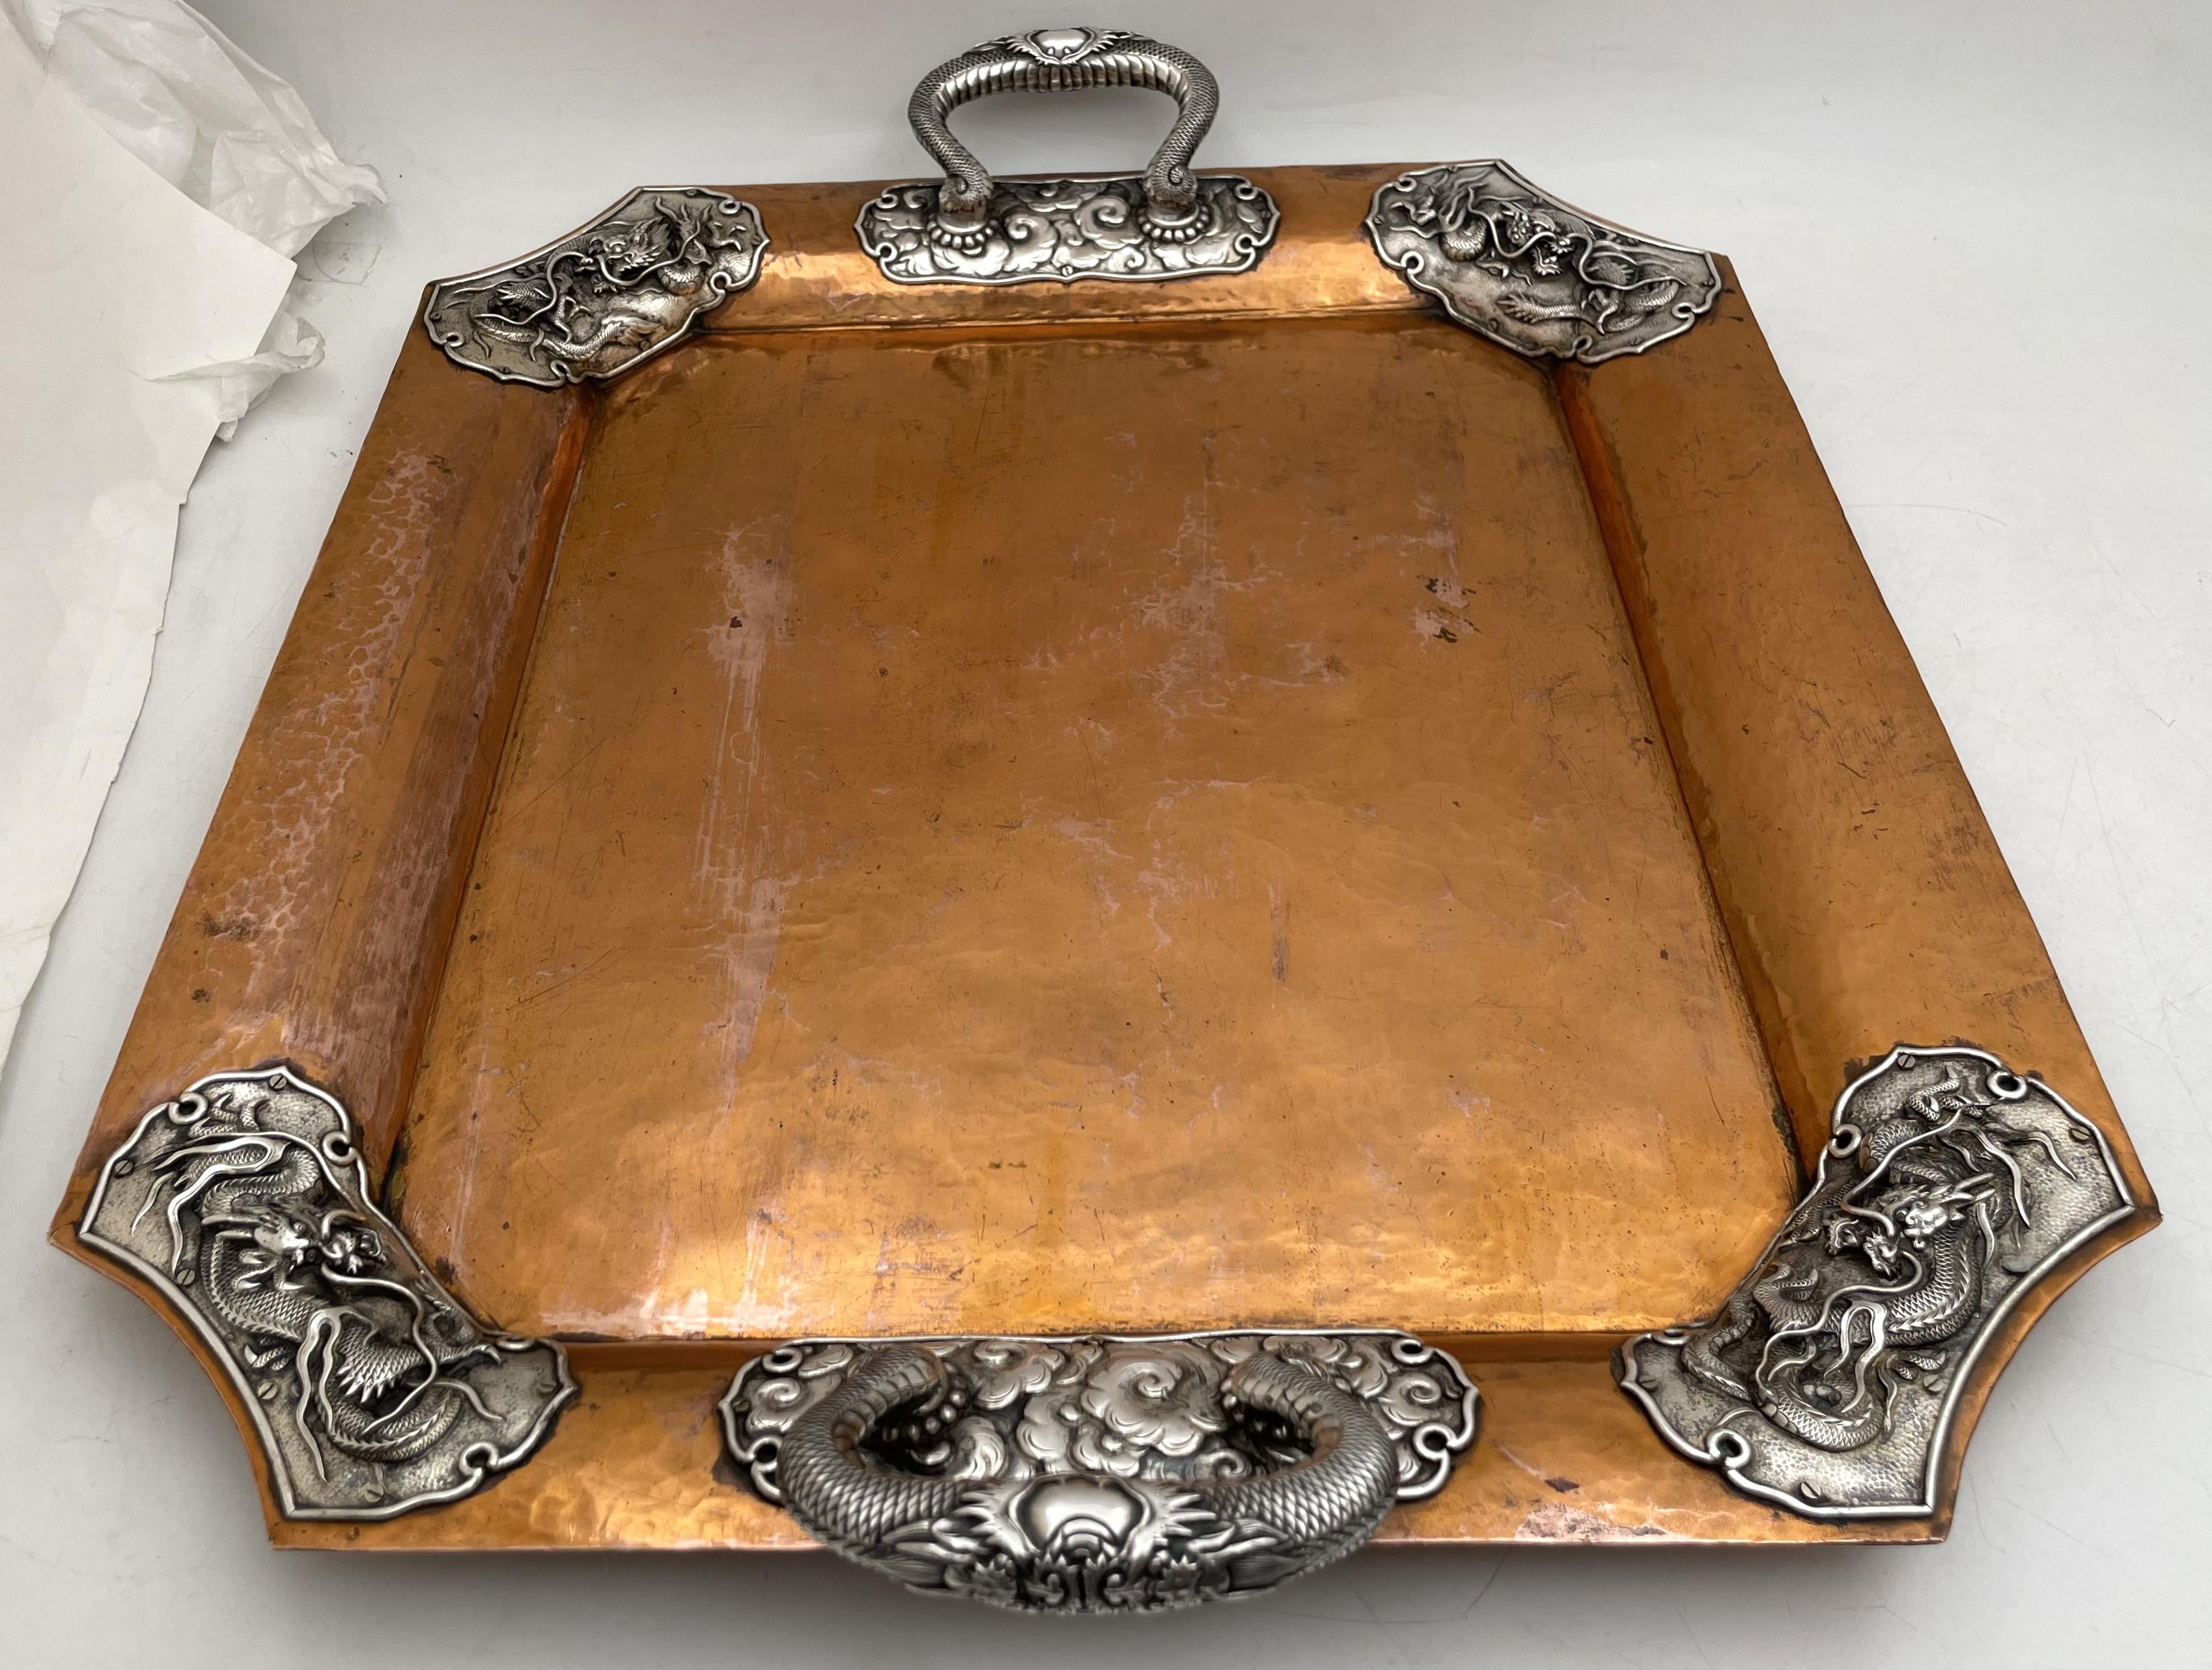 Japanese Mixed Metal Silver on Copper Tray with Dragon Motifs In Good Condition For Sale In New York, NY